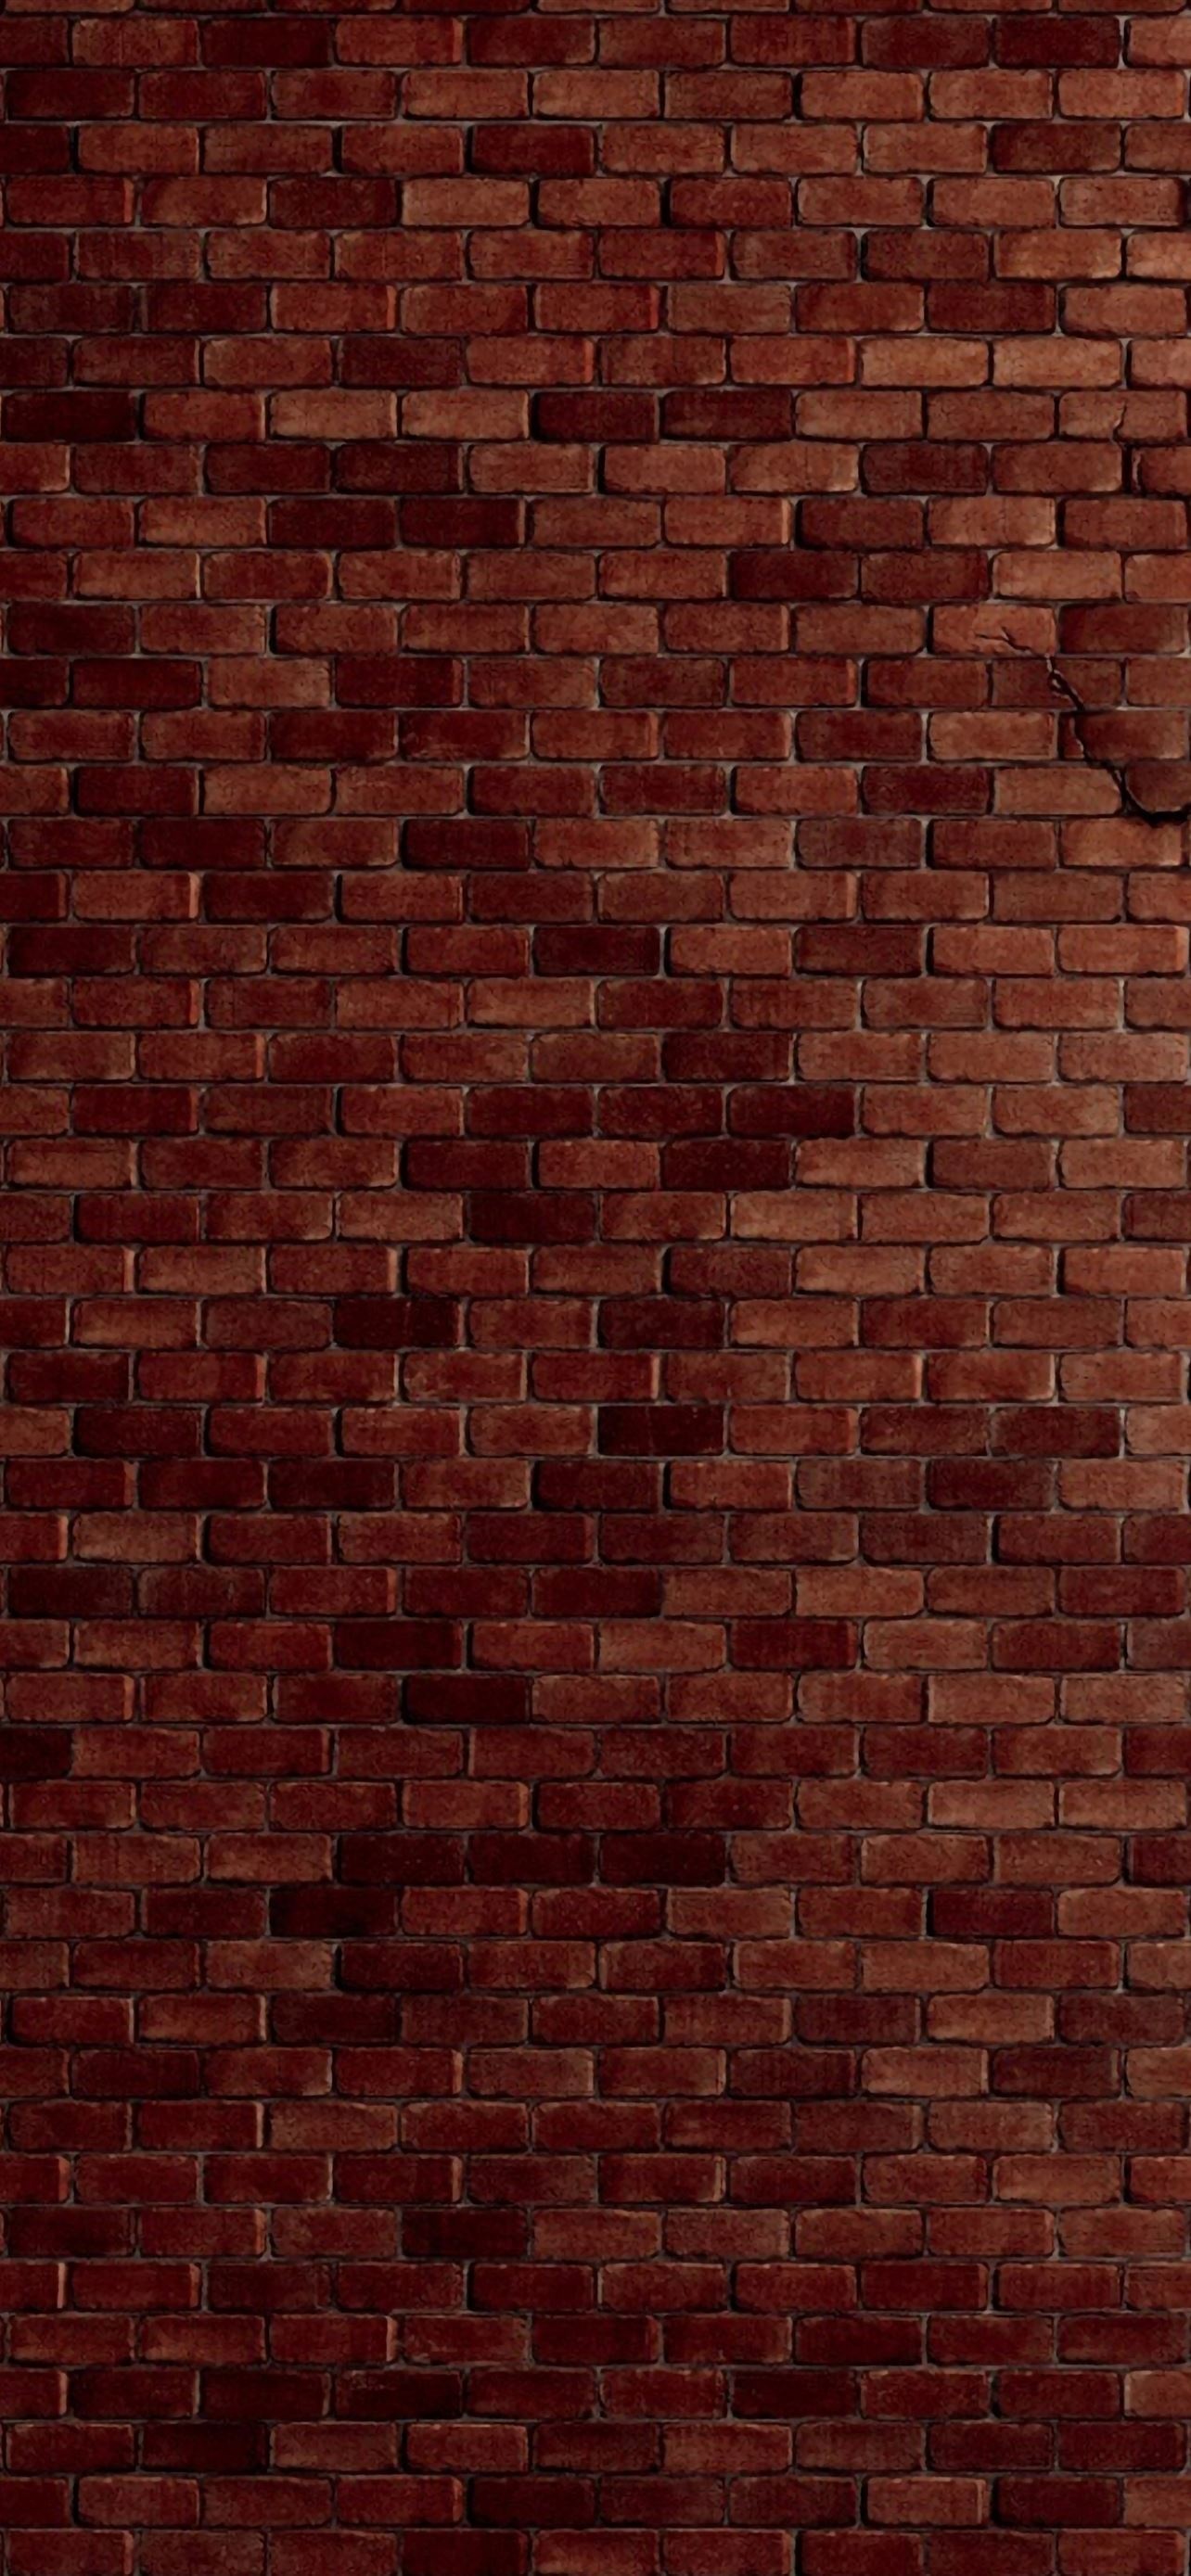 Brick wallpaper, iPhone backgrounds, Free download, Rustic vibes, 1290x2780 HD Handy